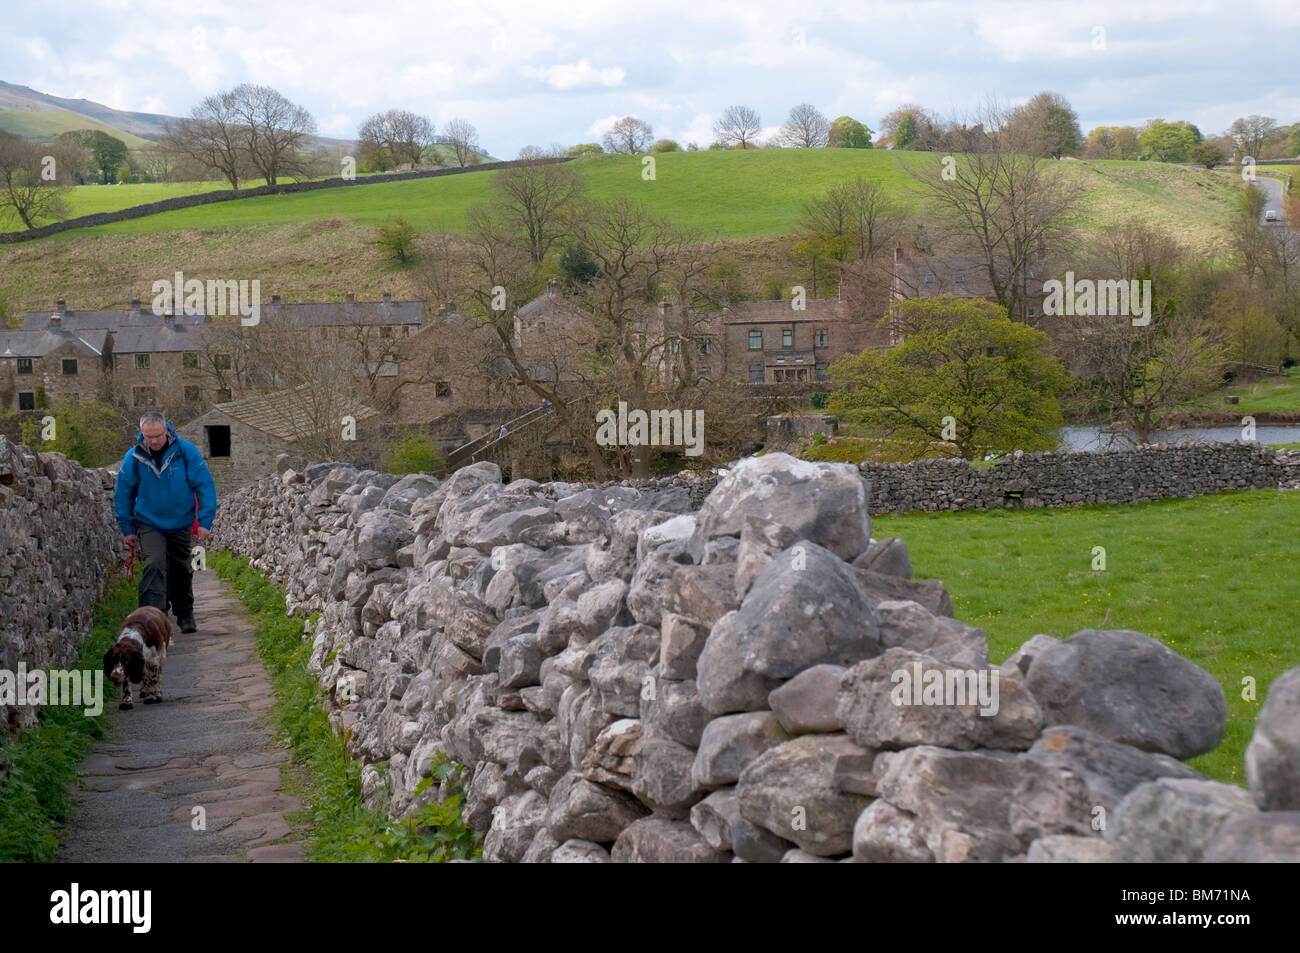 The countryside surrounding the village of Grassington in the Yorkshire Dales and Linton Falls Stock Photo